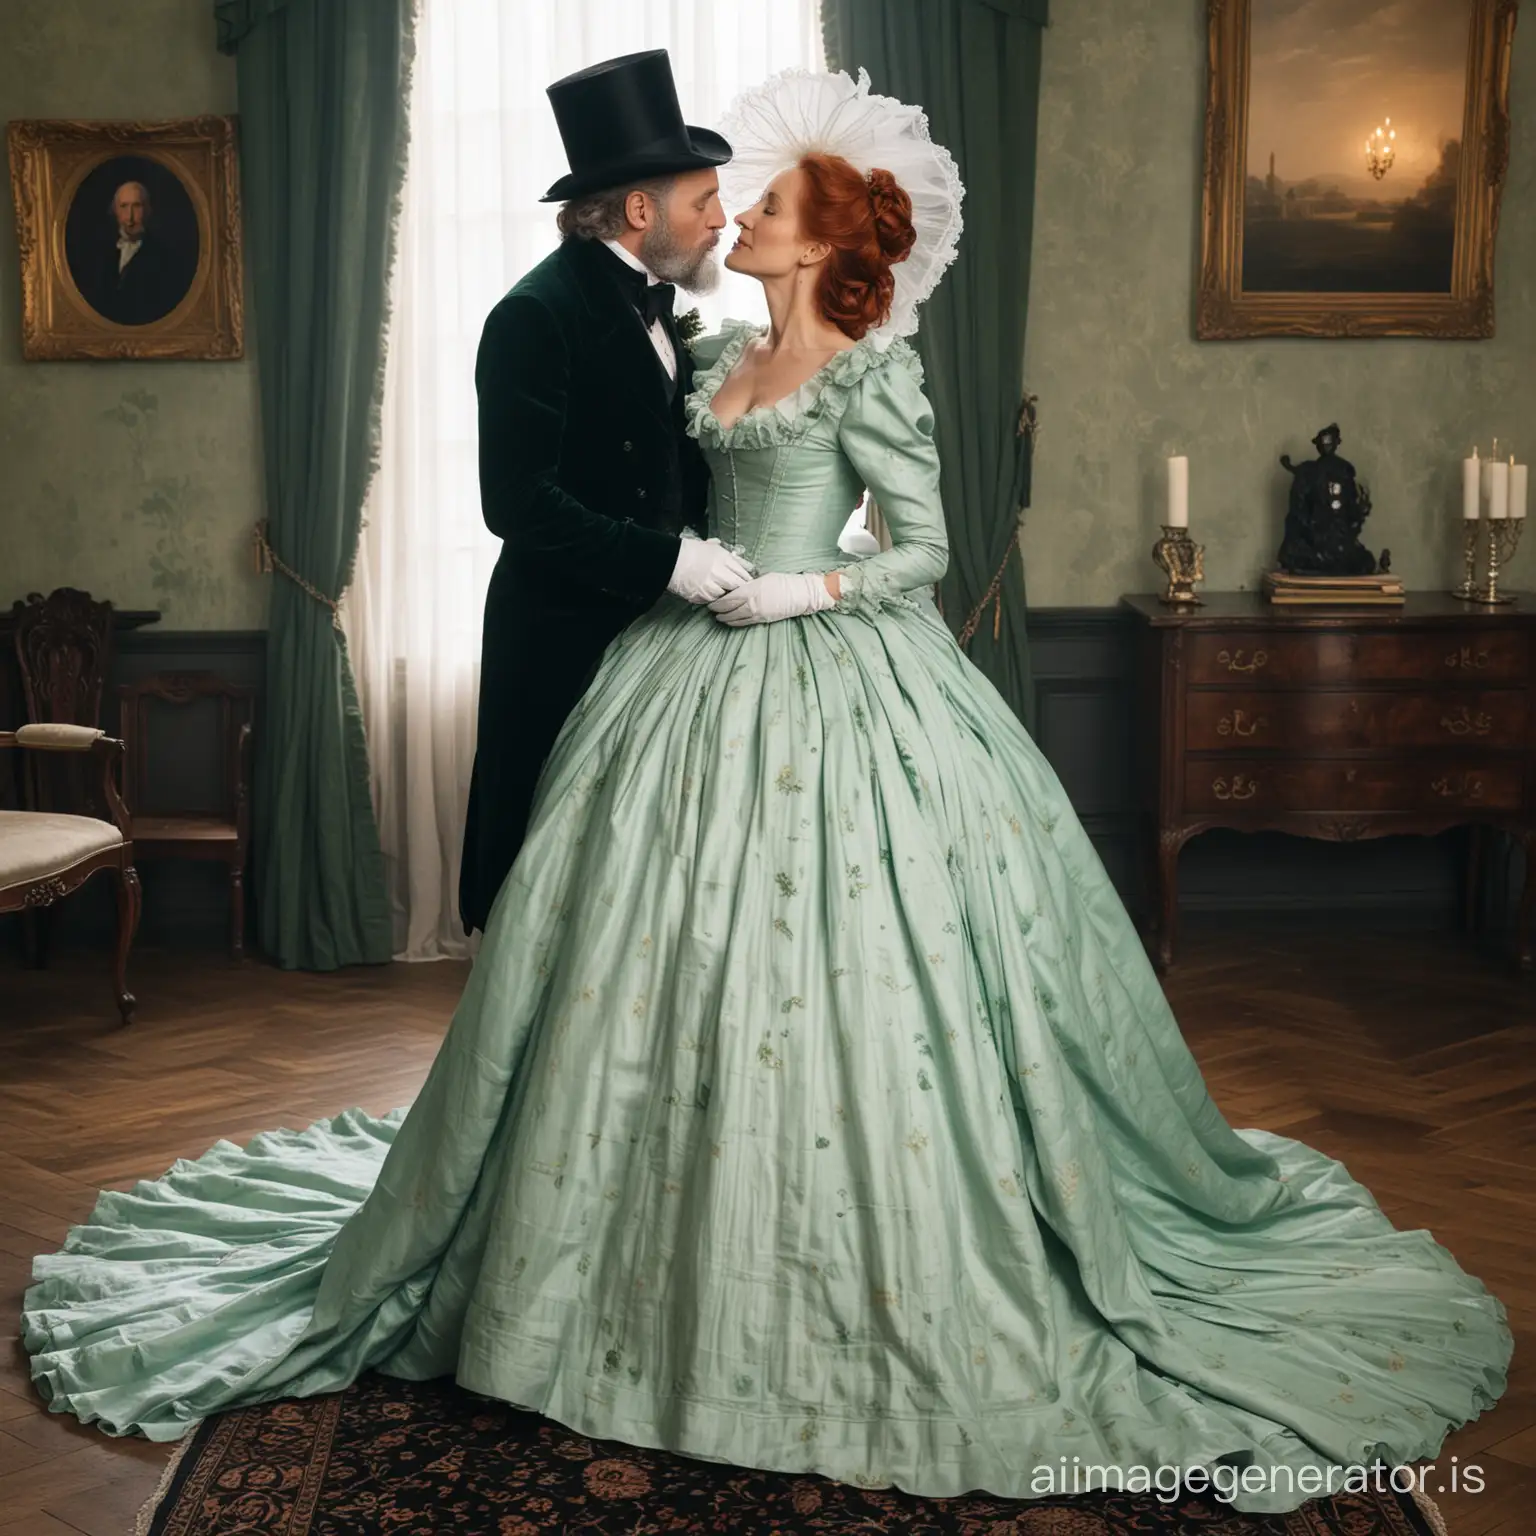 Victorian-Newlyweds-Romantic-Redhead-Bride-and-Groom-Embrace